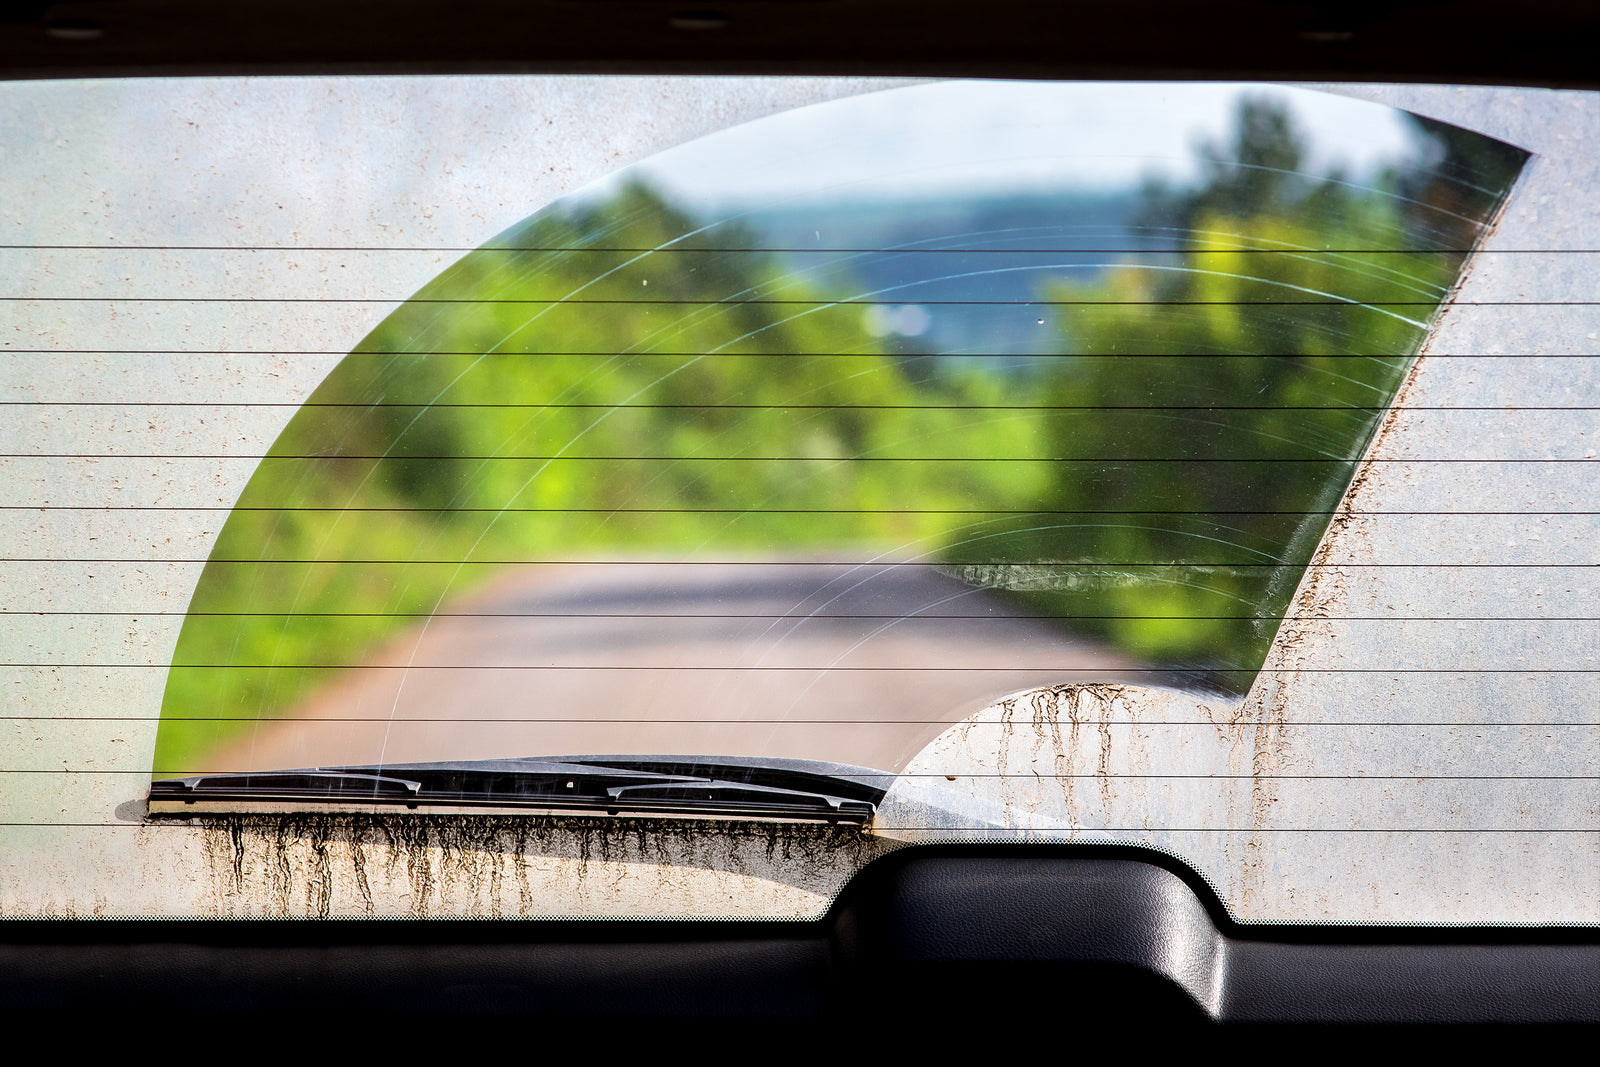 5 anti-fogging products that reduce window fogging in your automobile.